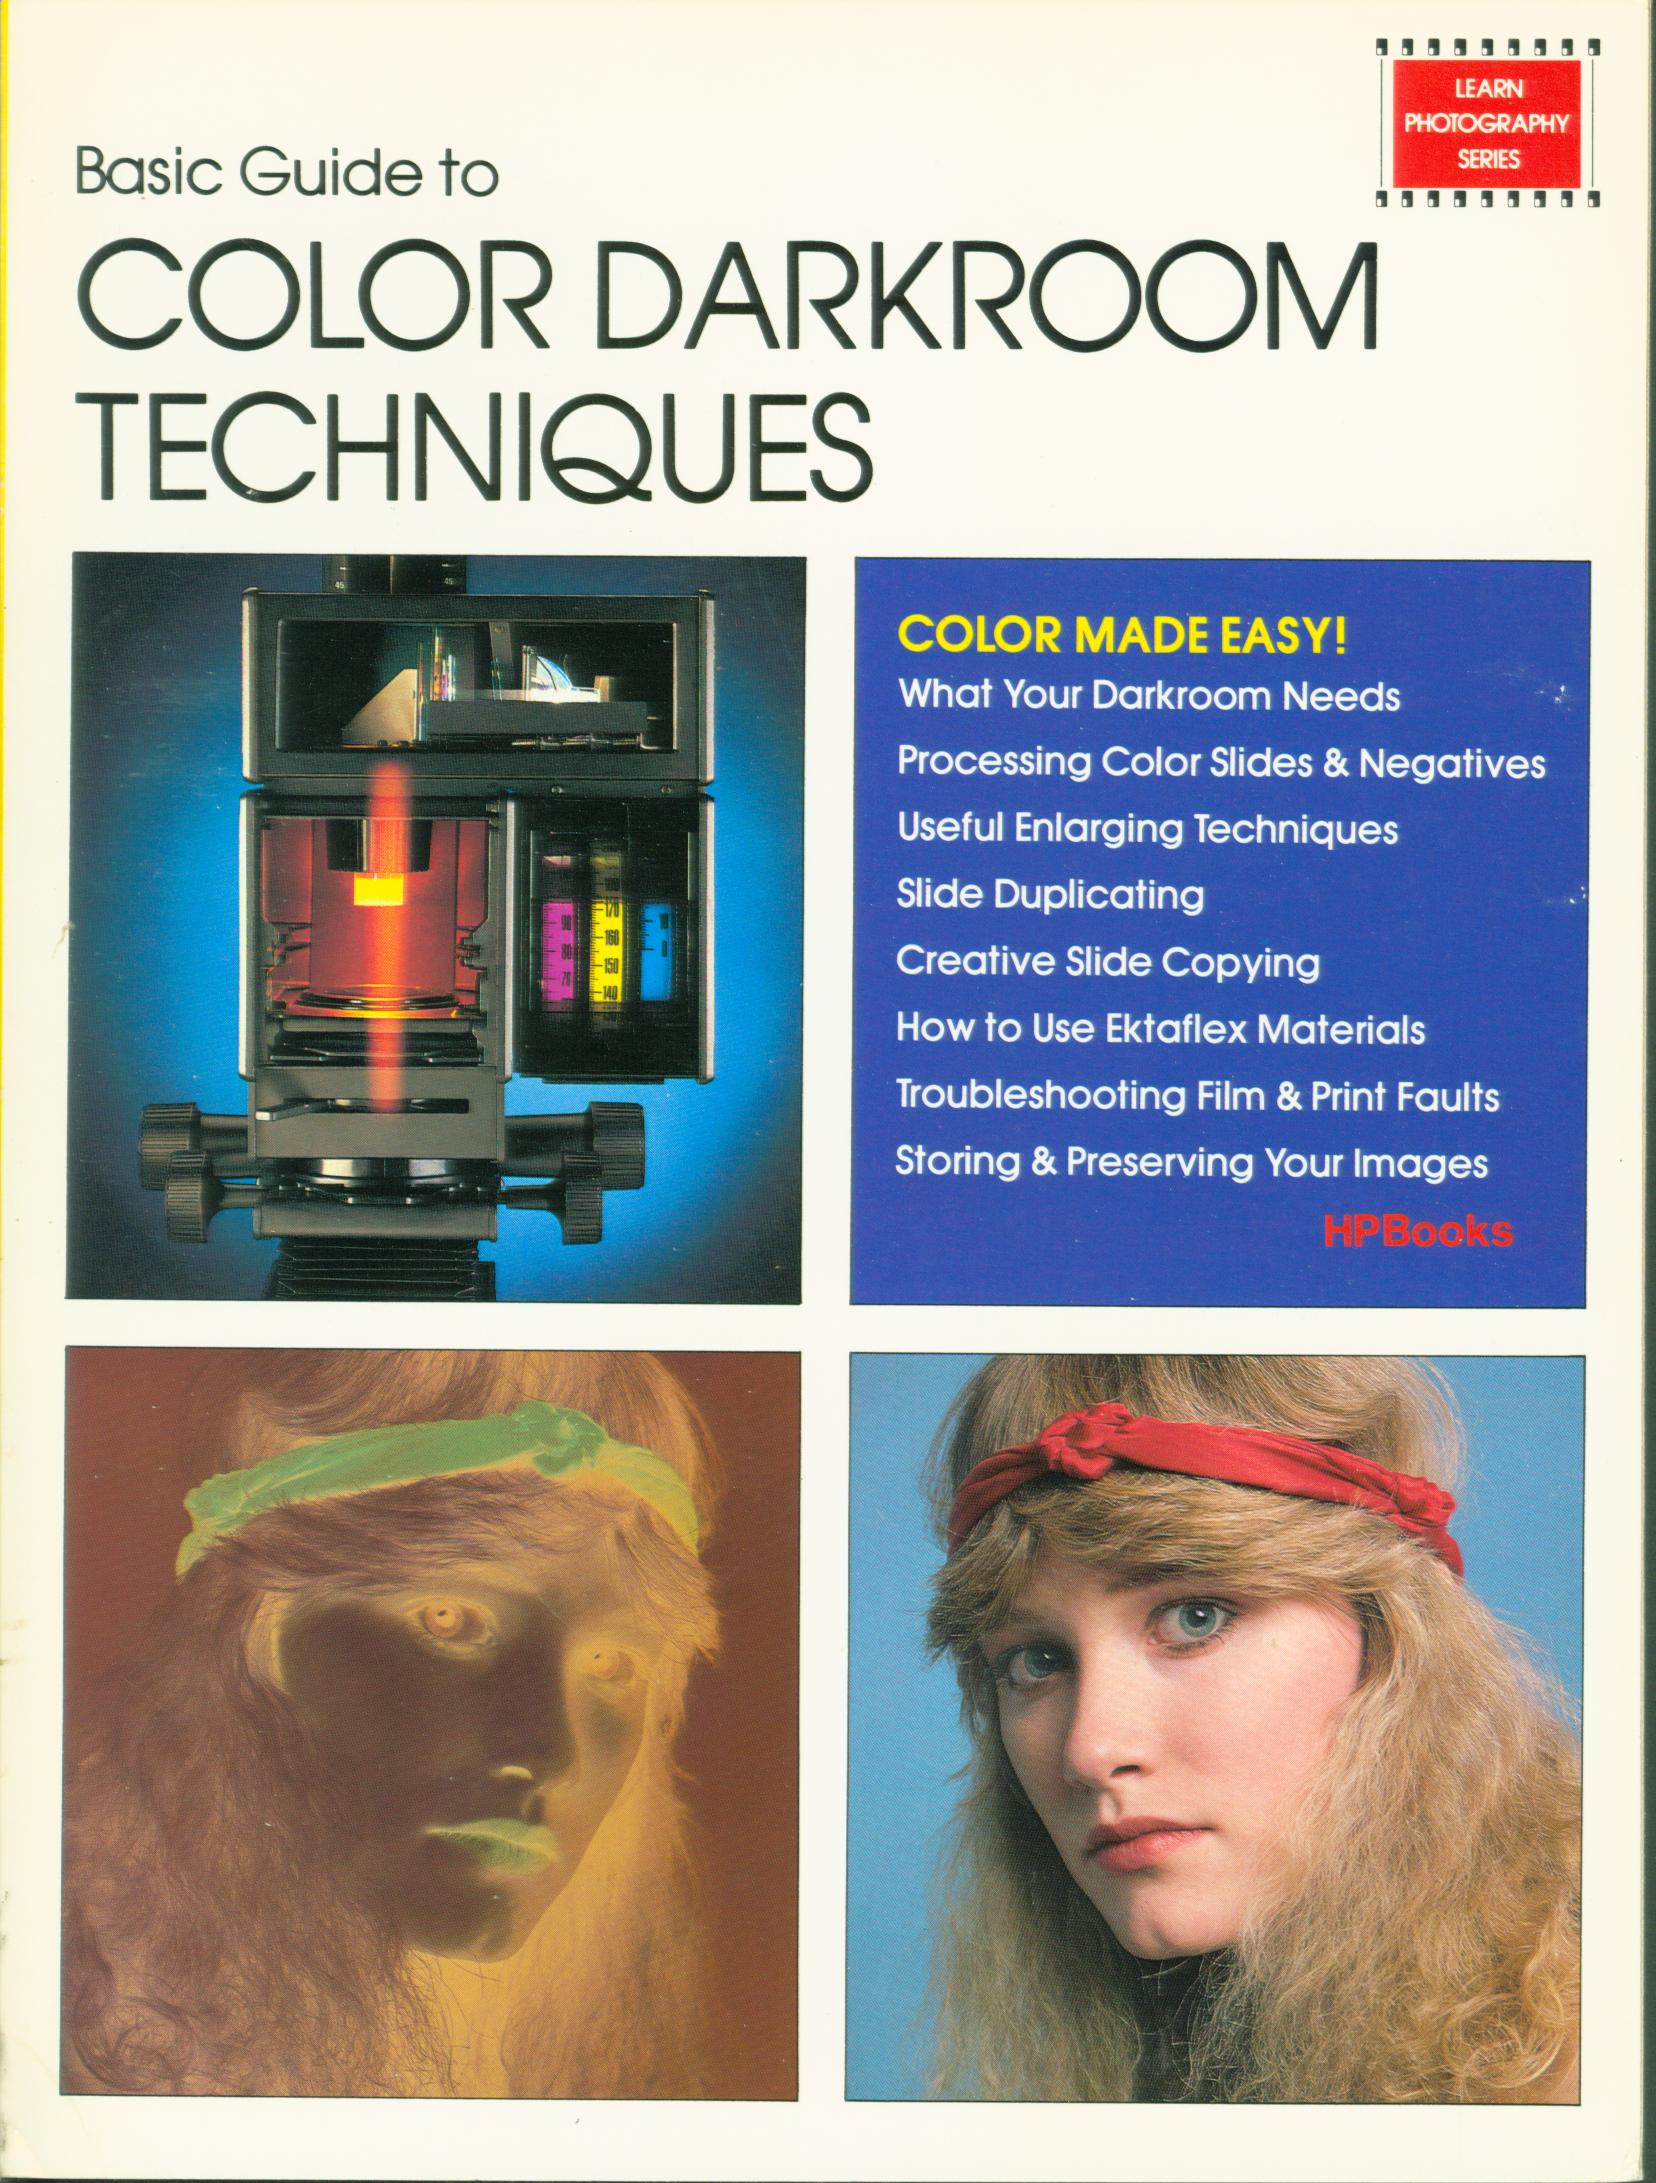 BASIC GUIDE TO COLOR DARKROOM TECHNIQUES.